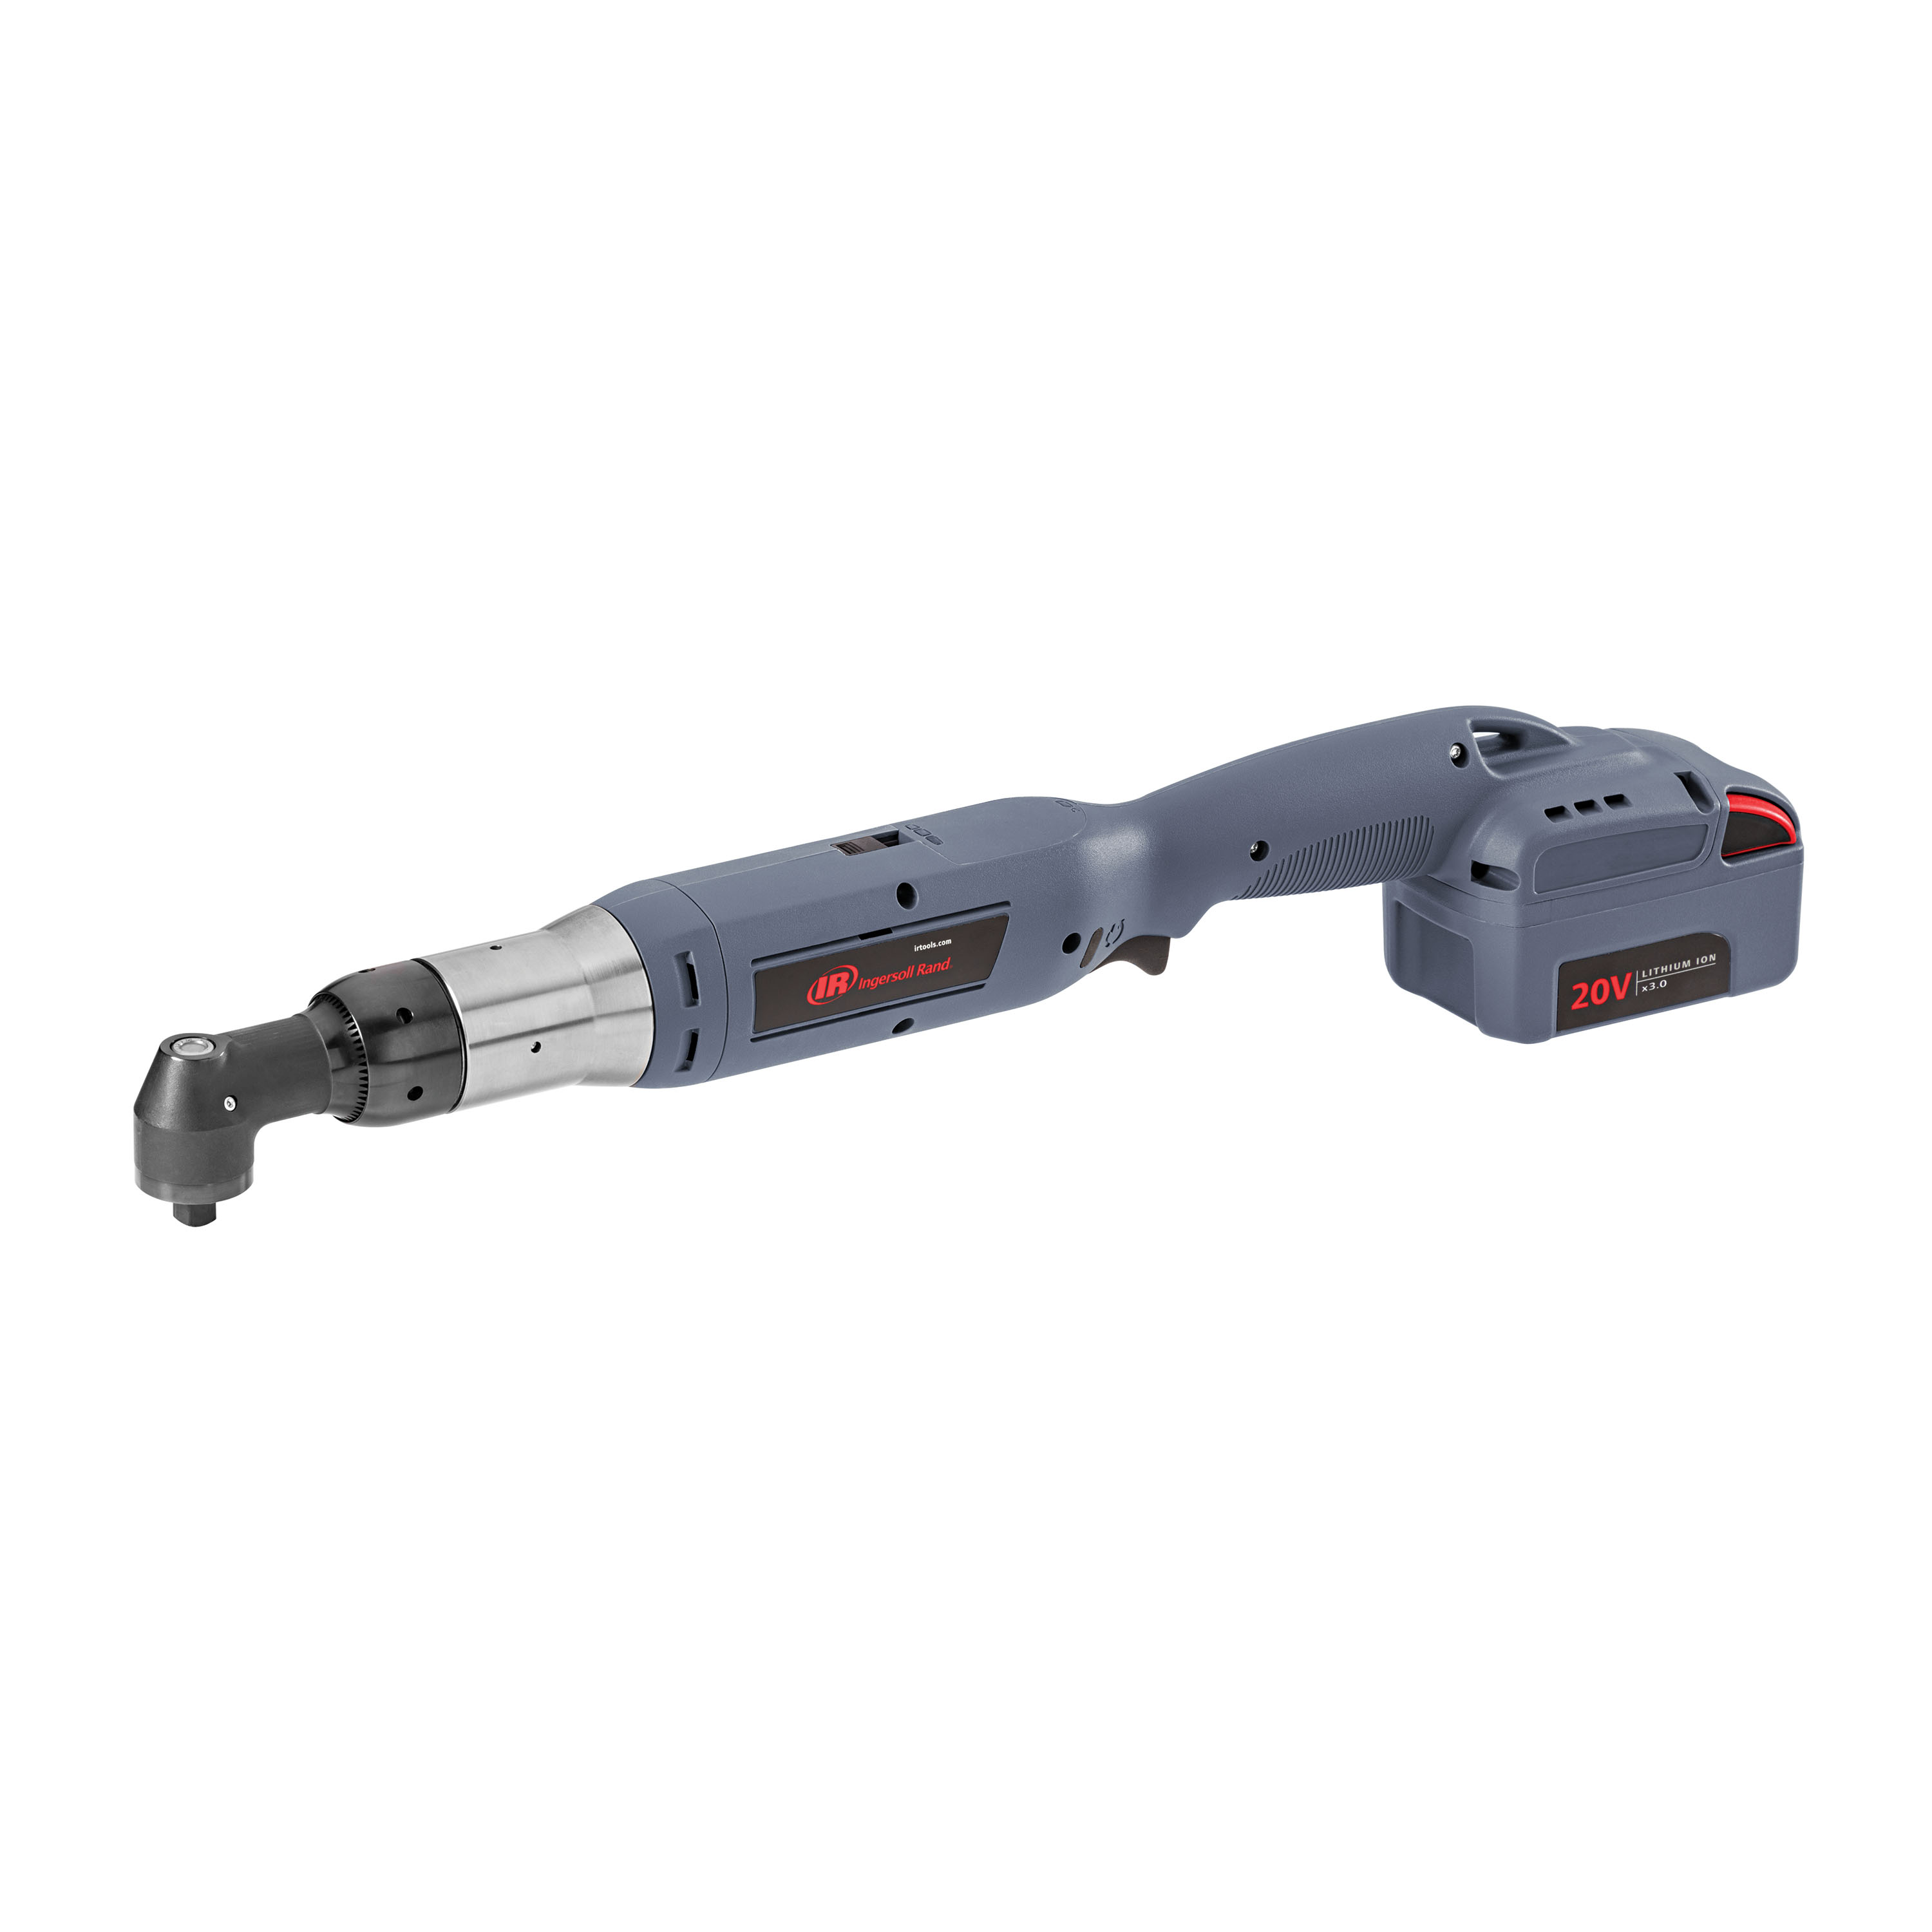 qx series Cordless precision fastening systems QXNra Cordless anglela